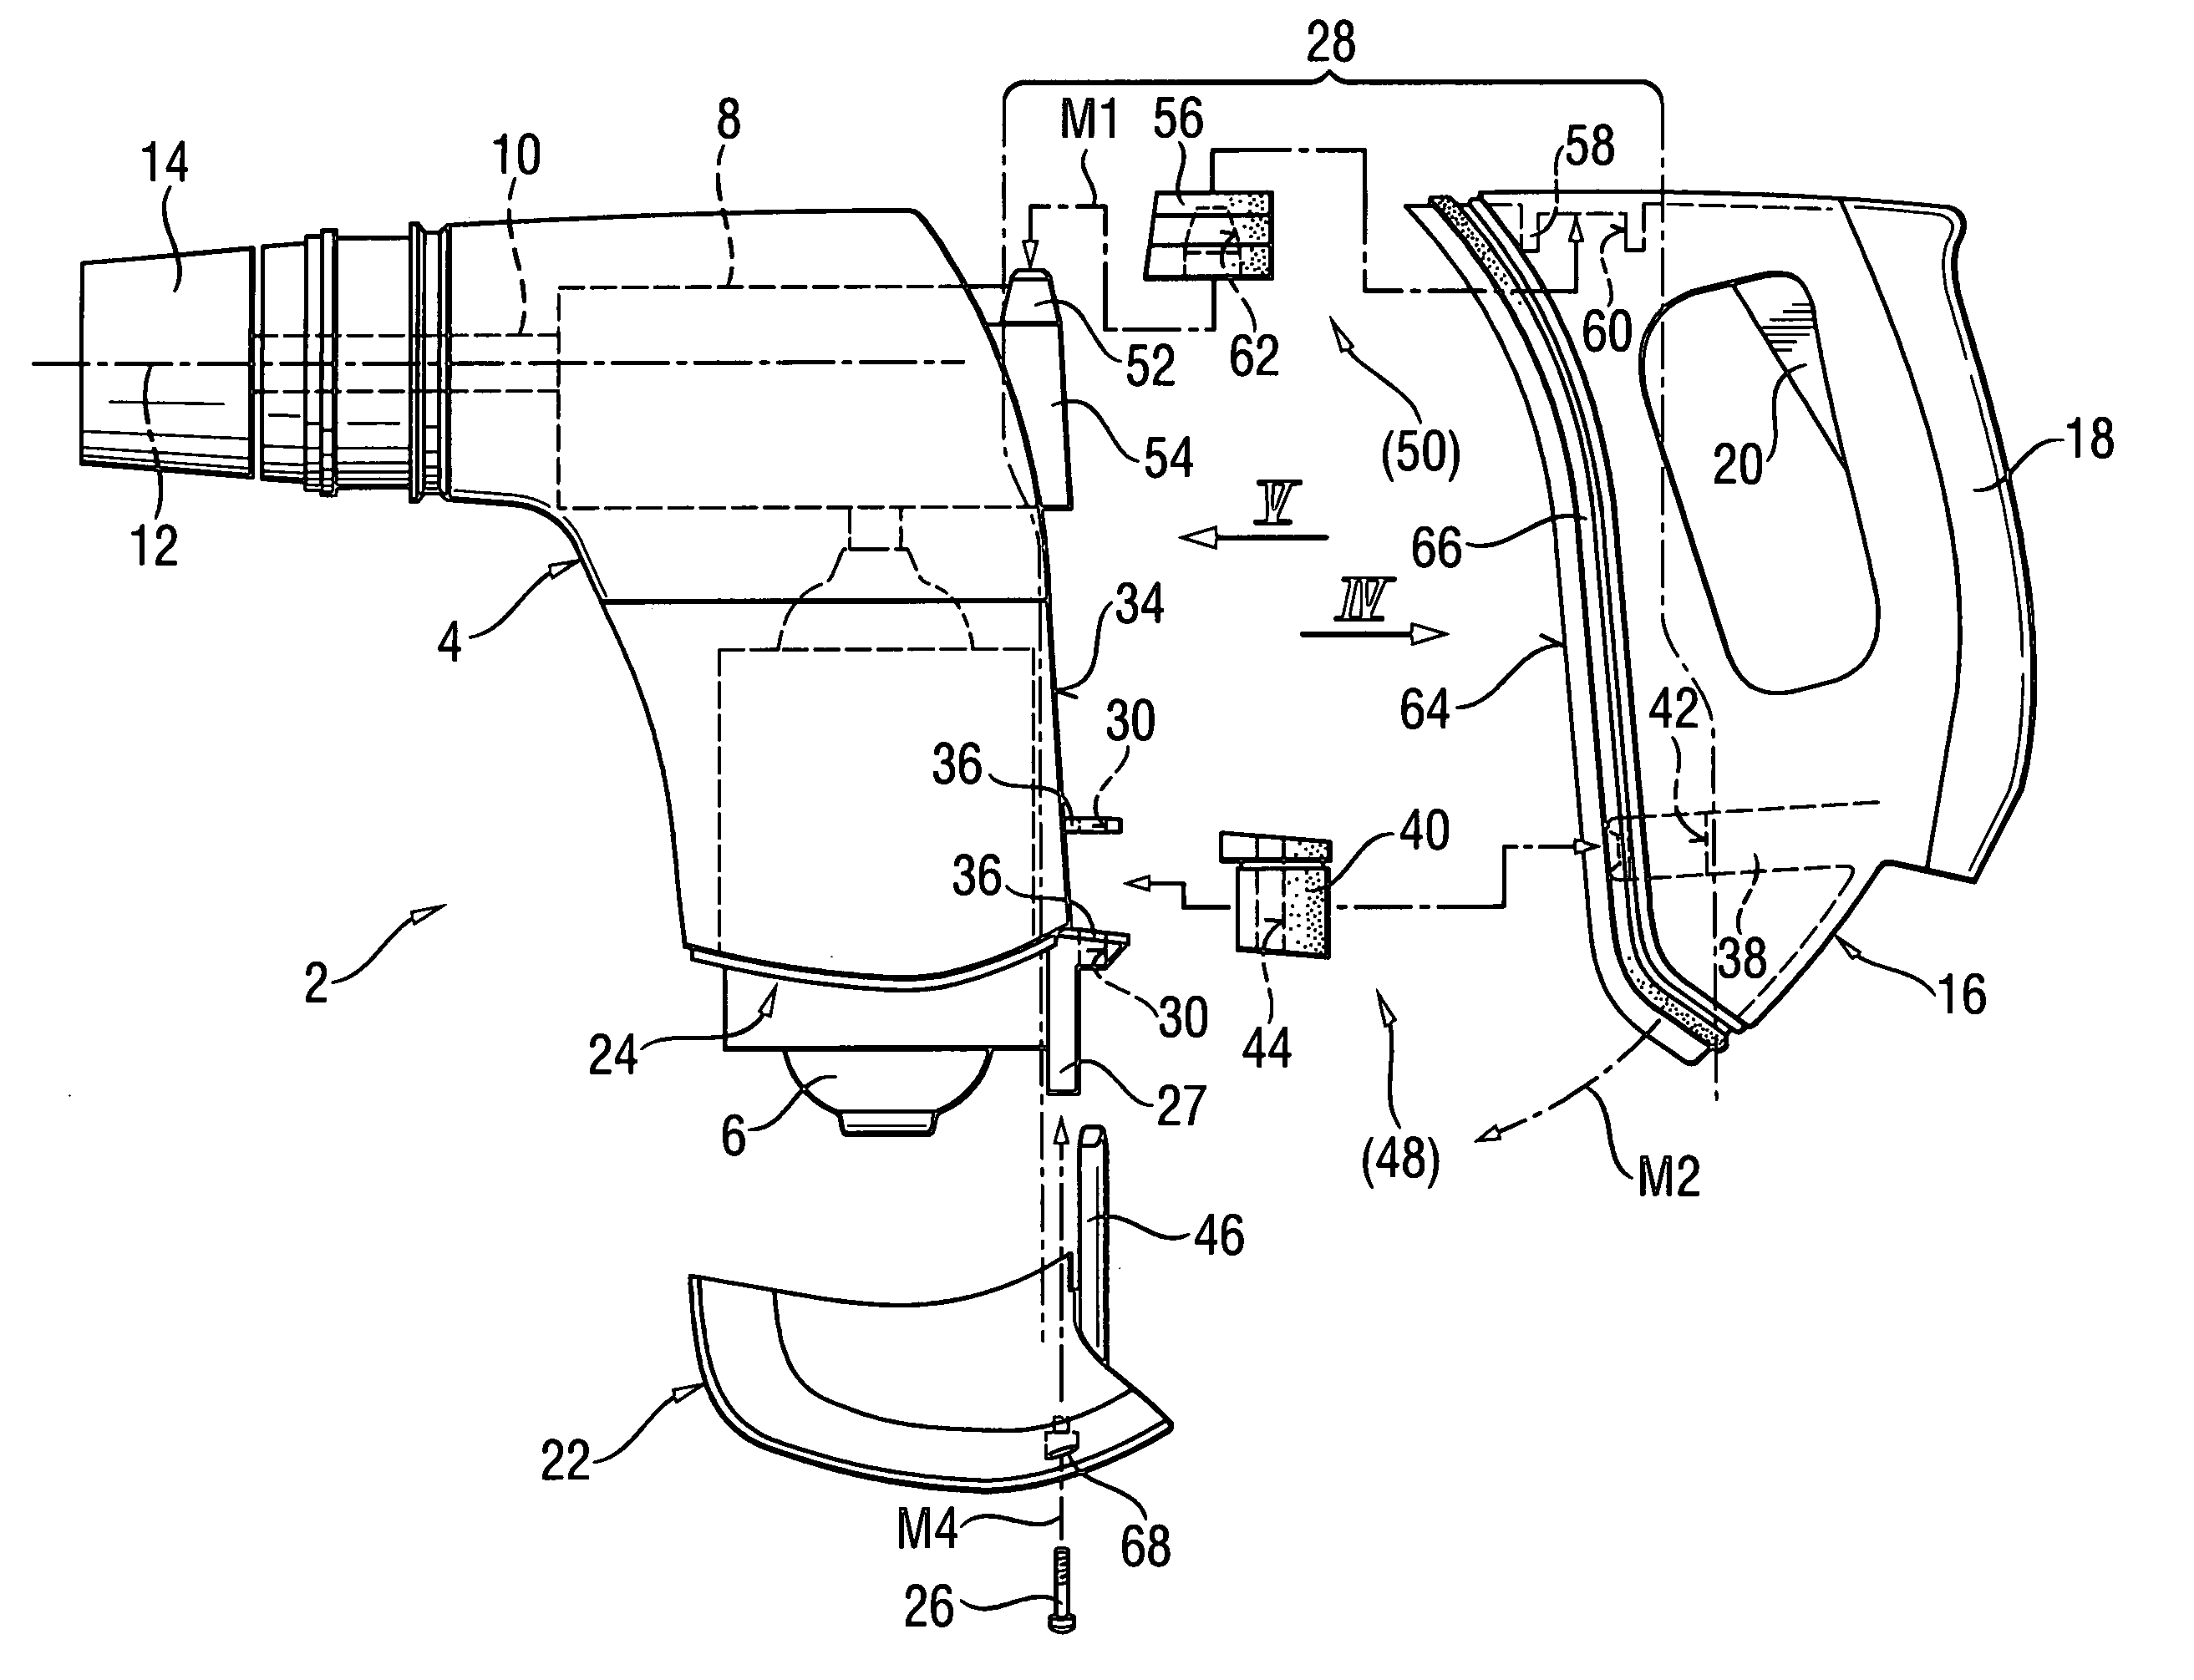 Hand-held power tool having main and handle housings with a connection device for connecting the housings